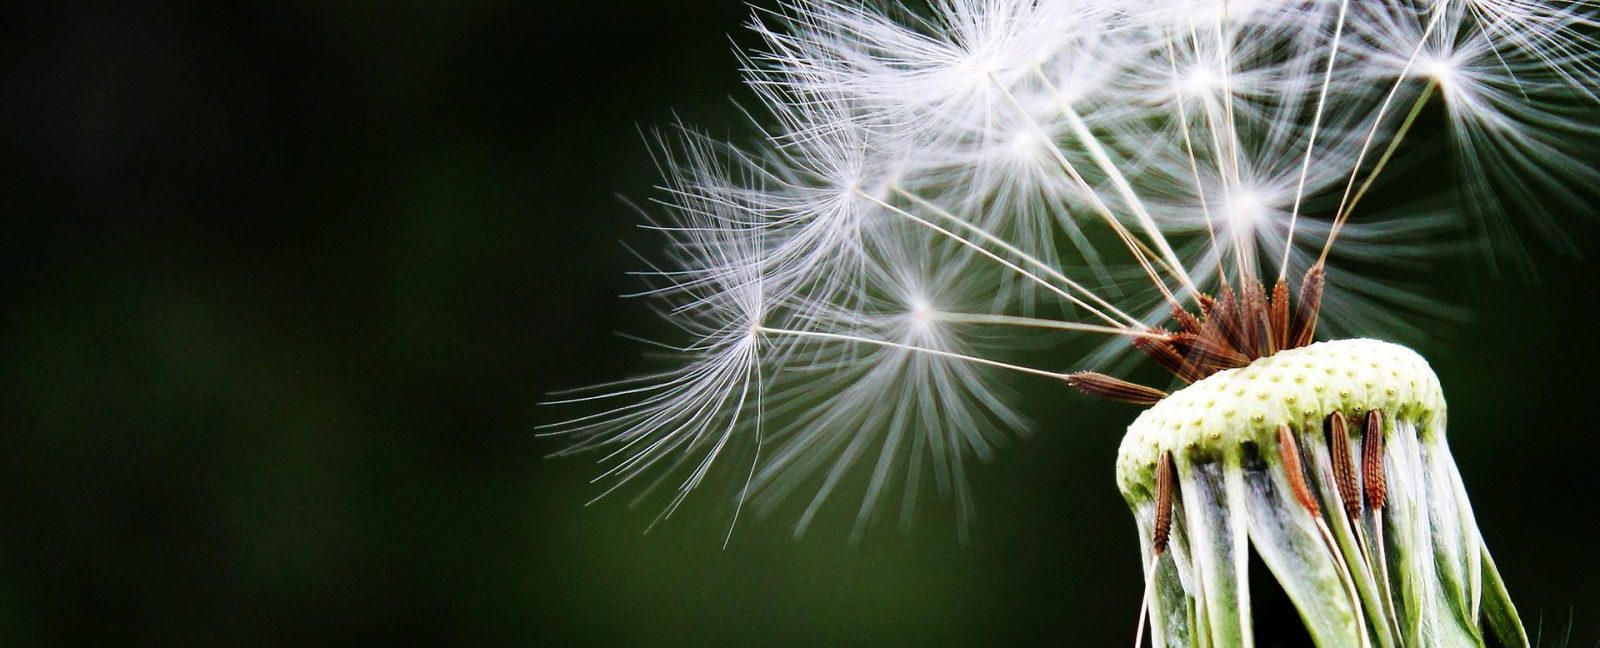 What’s causing your allergies?